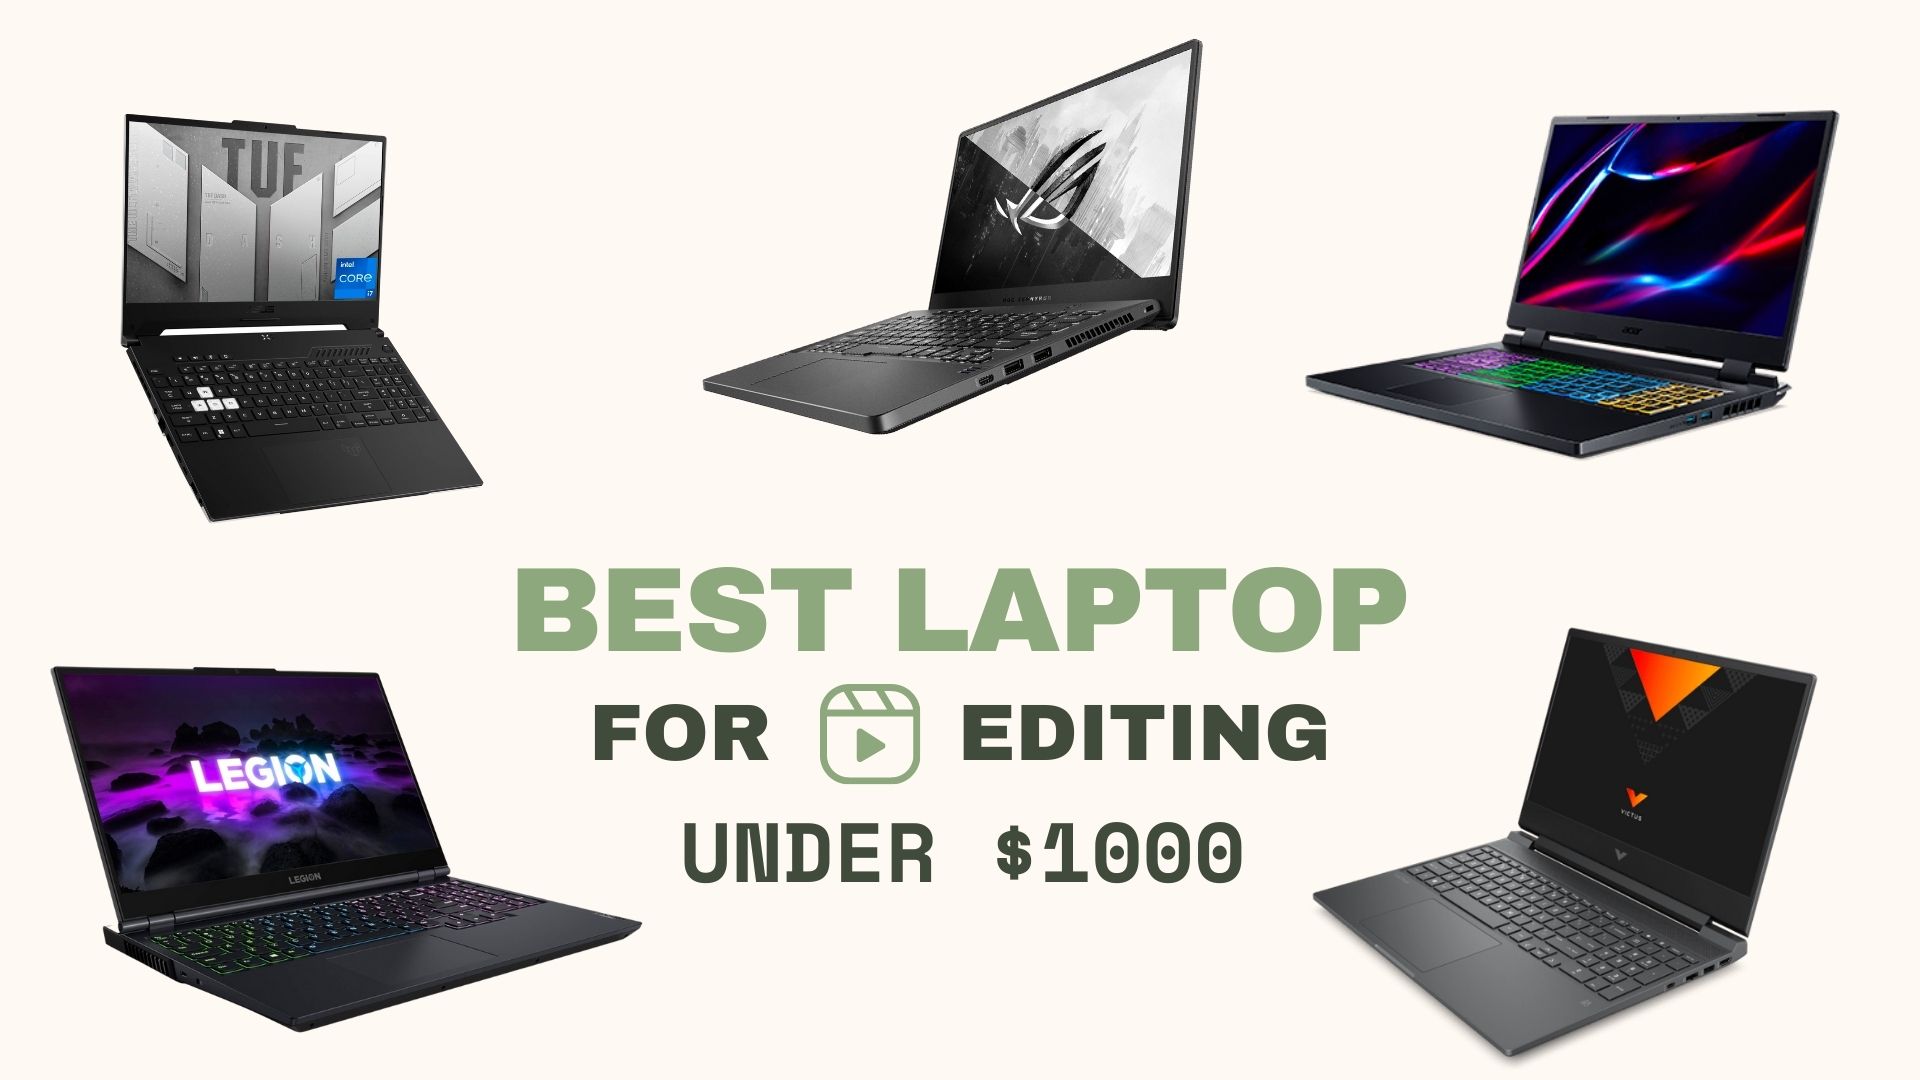 Best Laptop for Video Editing Under 1000